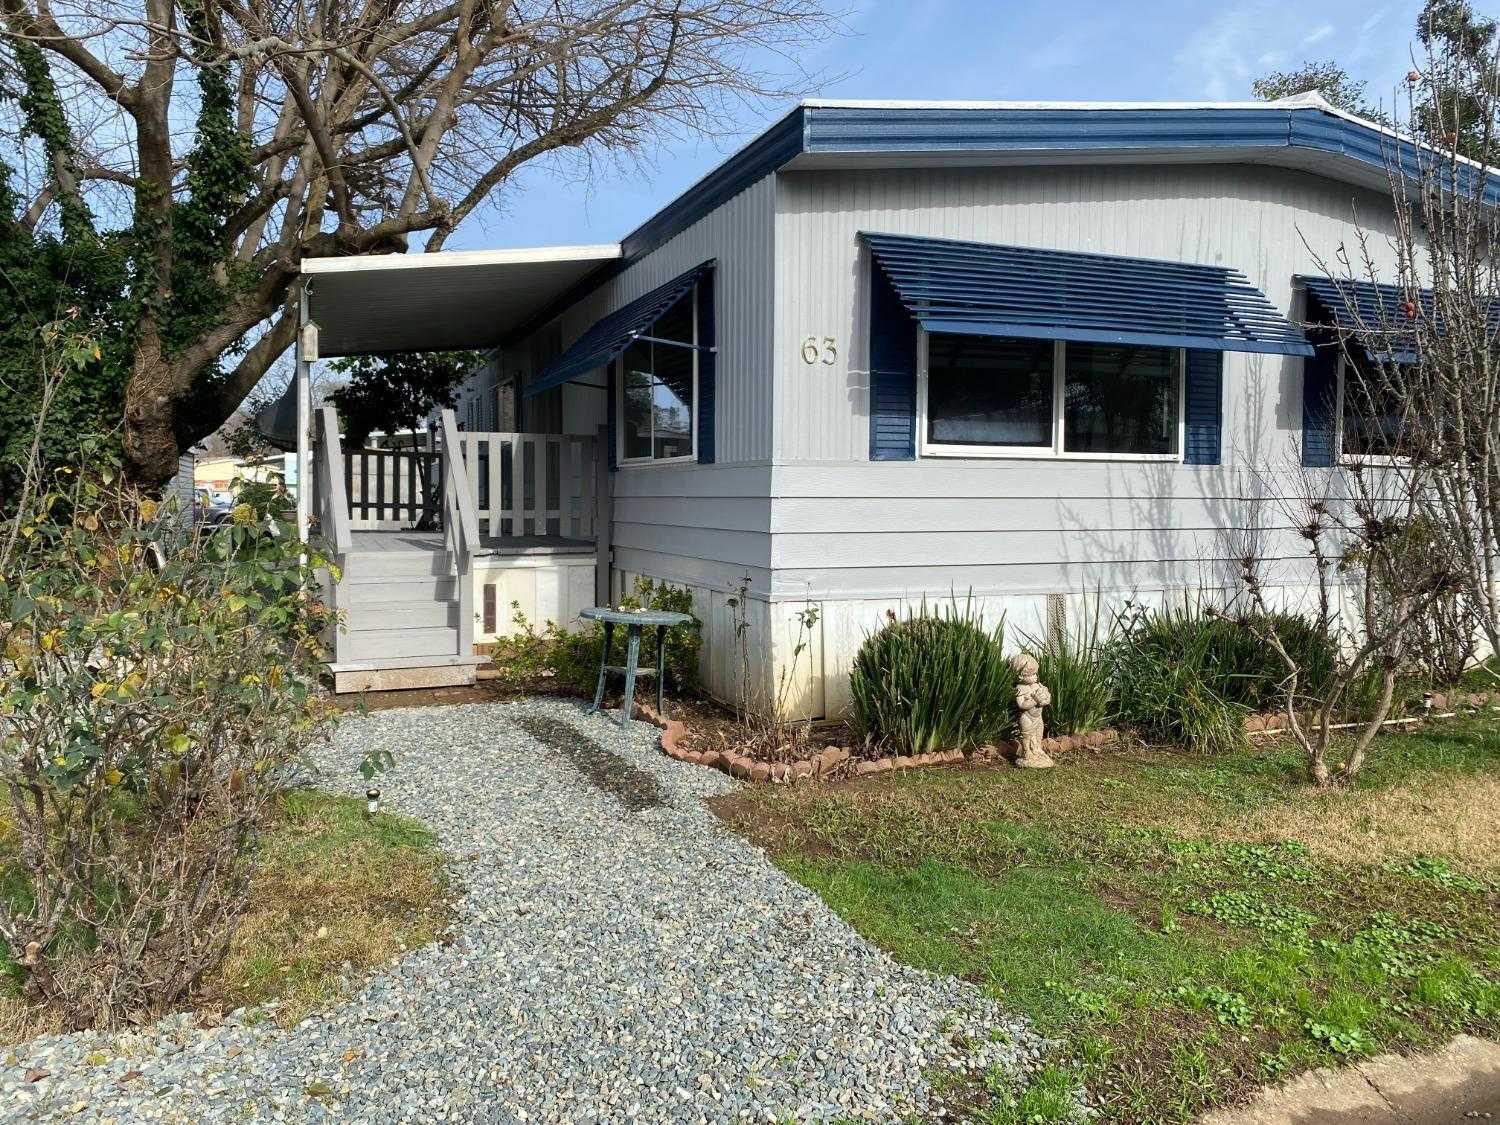 $63,000 - 2Br/2Ba -  for Sale in Oroville